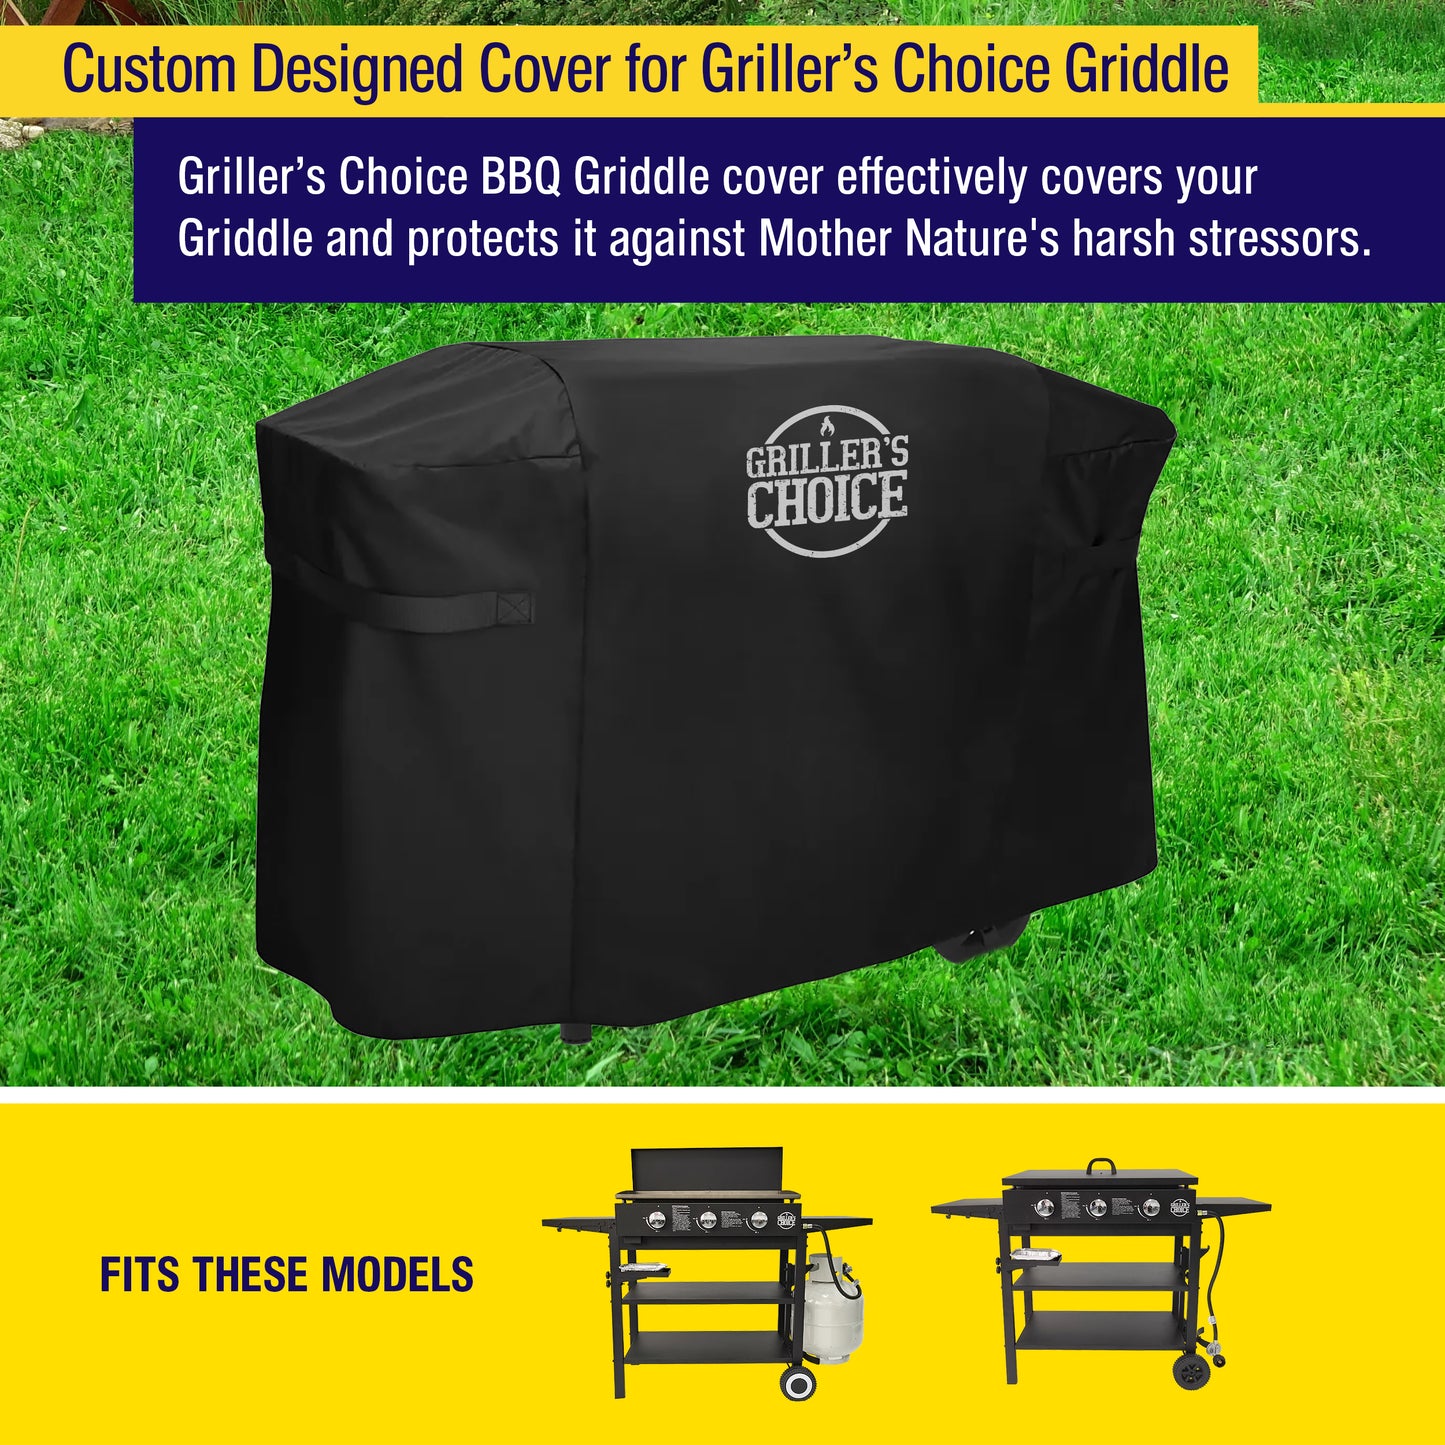 Griller's Choice Griddle Cover, Heavy Duty 600D Canvas, Double Layered Construction, Water Resistant, UV Protected, Fade and Crack Resistant